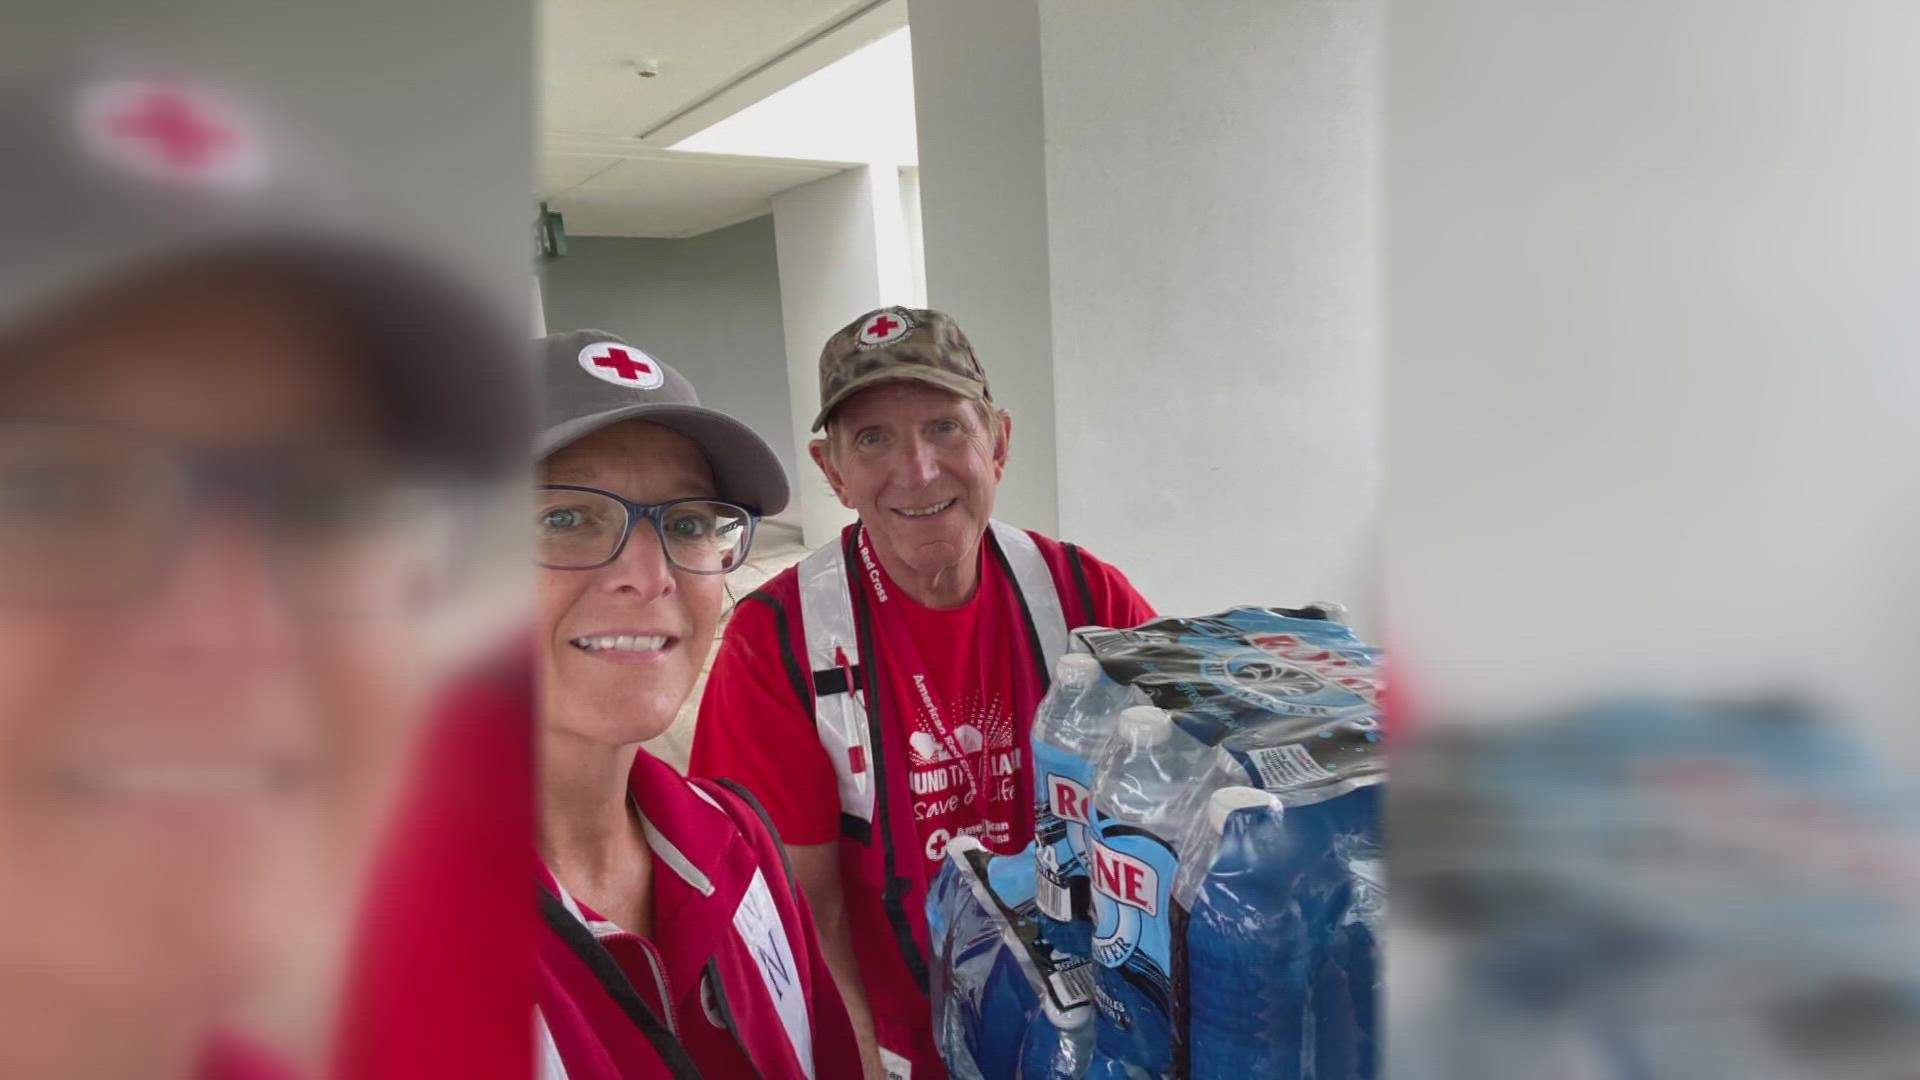 Volunteering with Red Cross Northern New England, Ann and Bob Cibelli, of Acton, are stationed at an emergency shelter in Tampa amid Hurricane Ian.